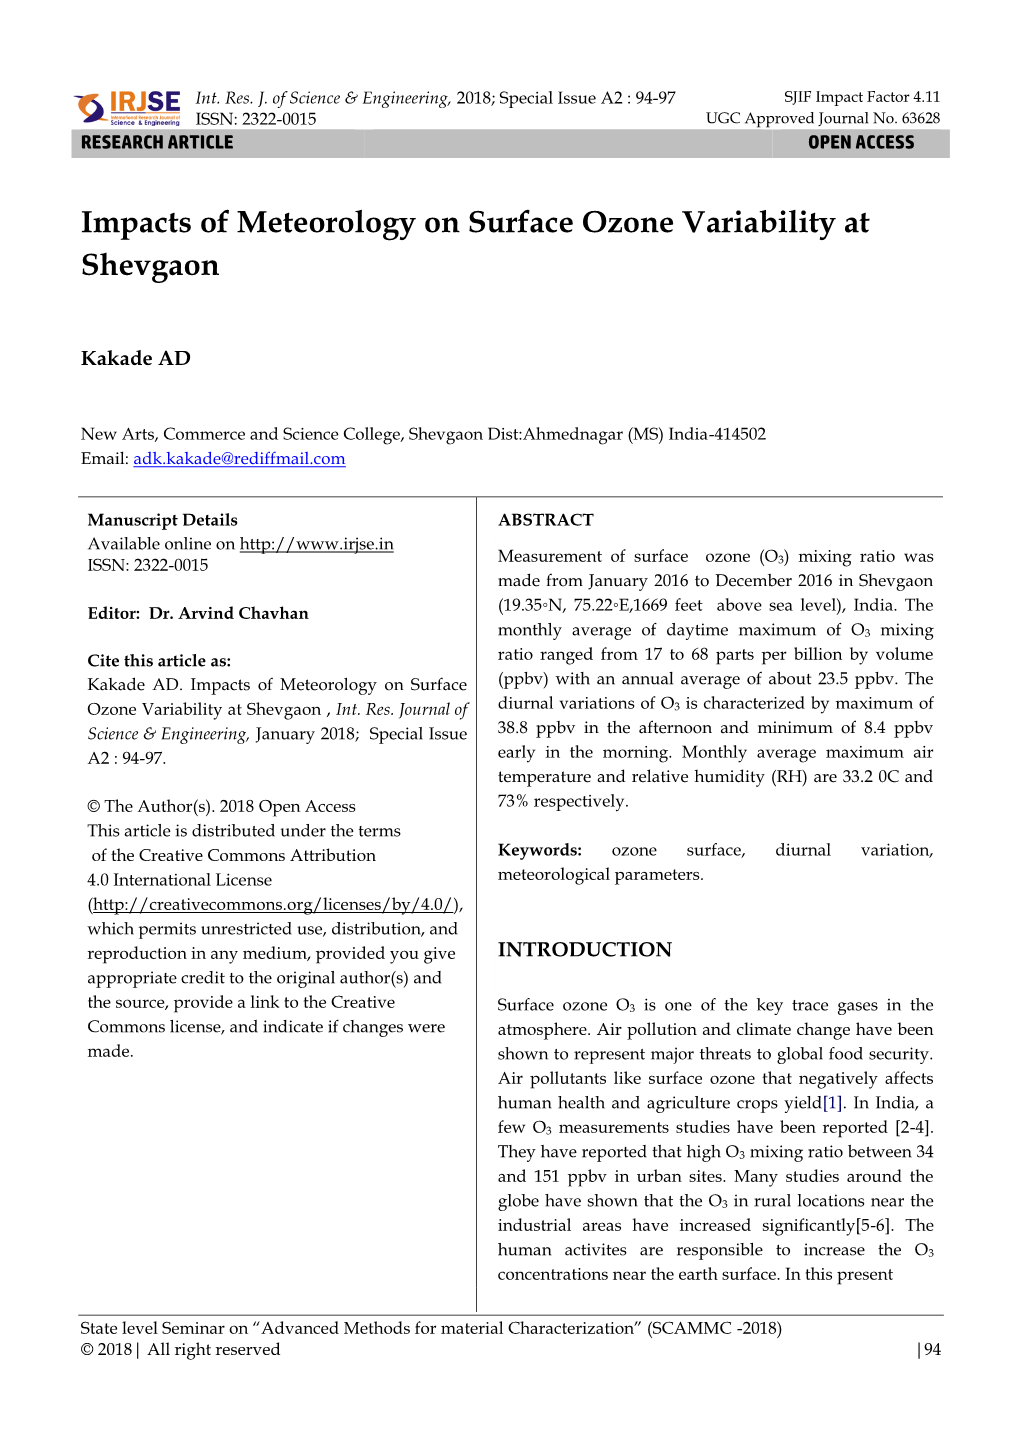 Impacts of Meteorology on Surface Ozone Variability at Shevgaon